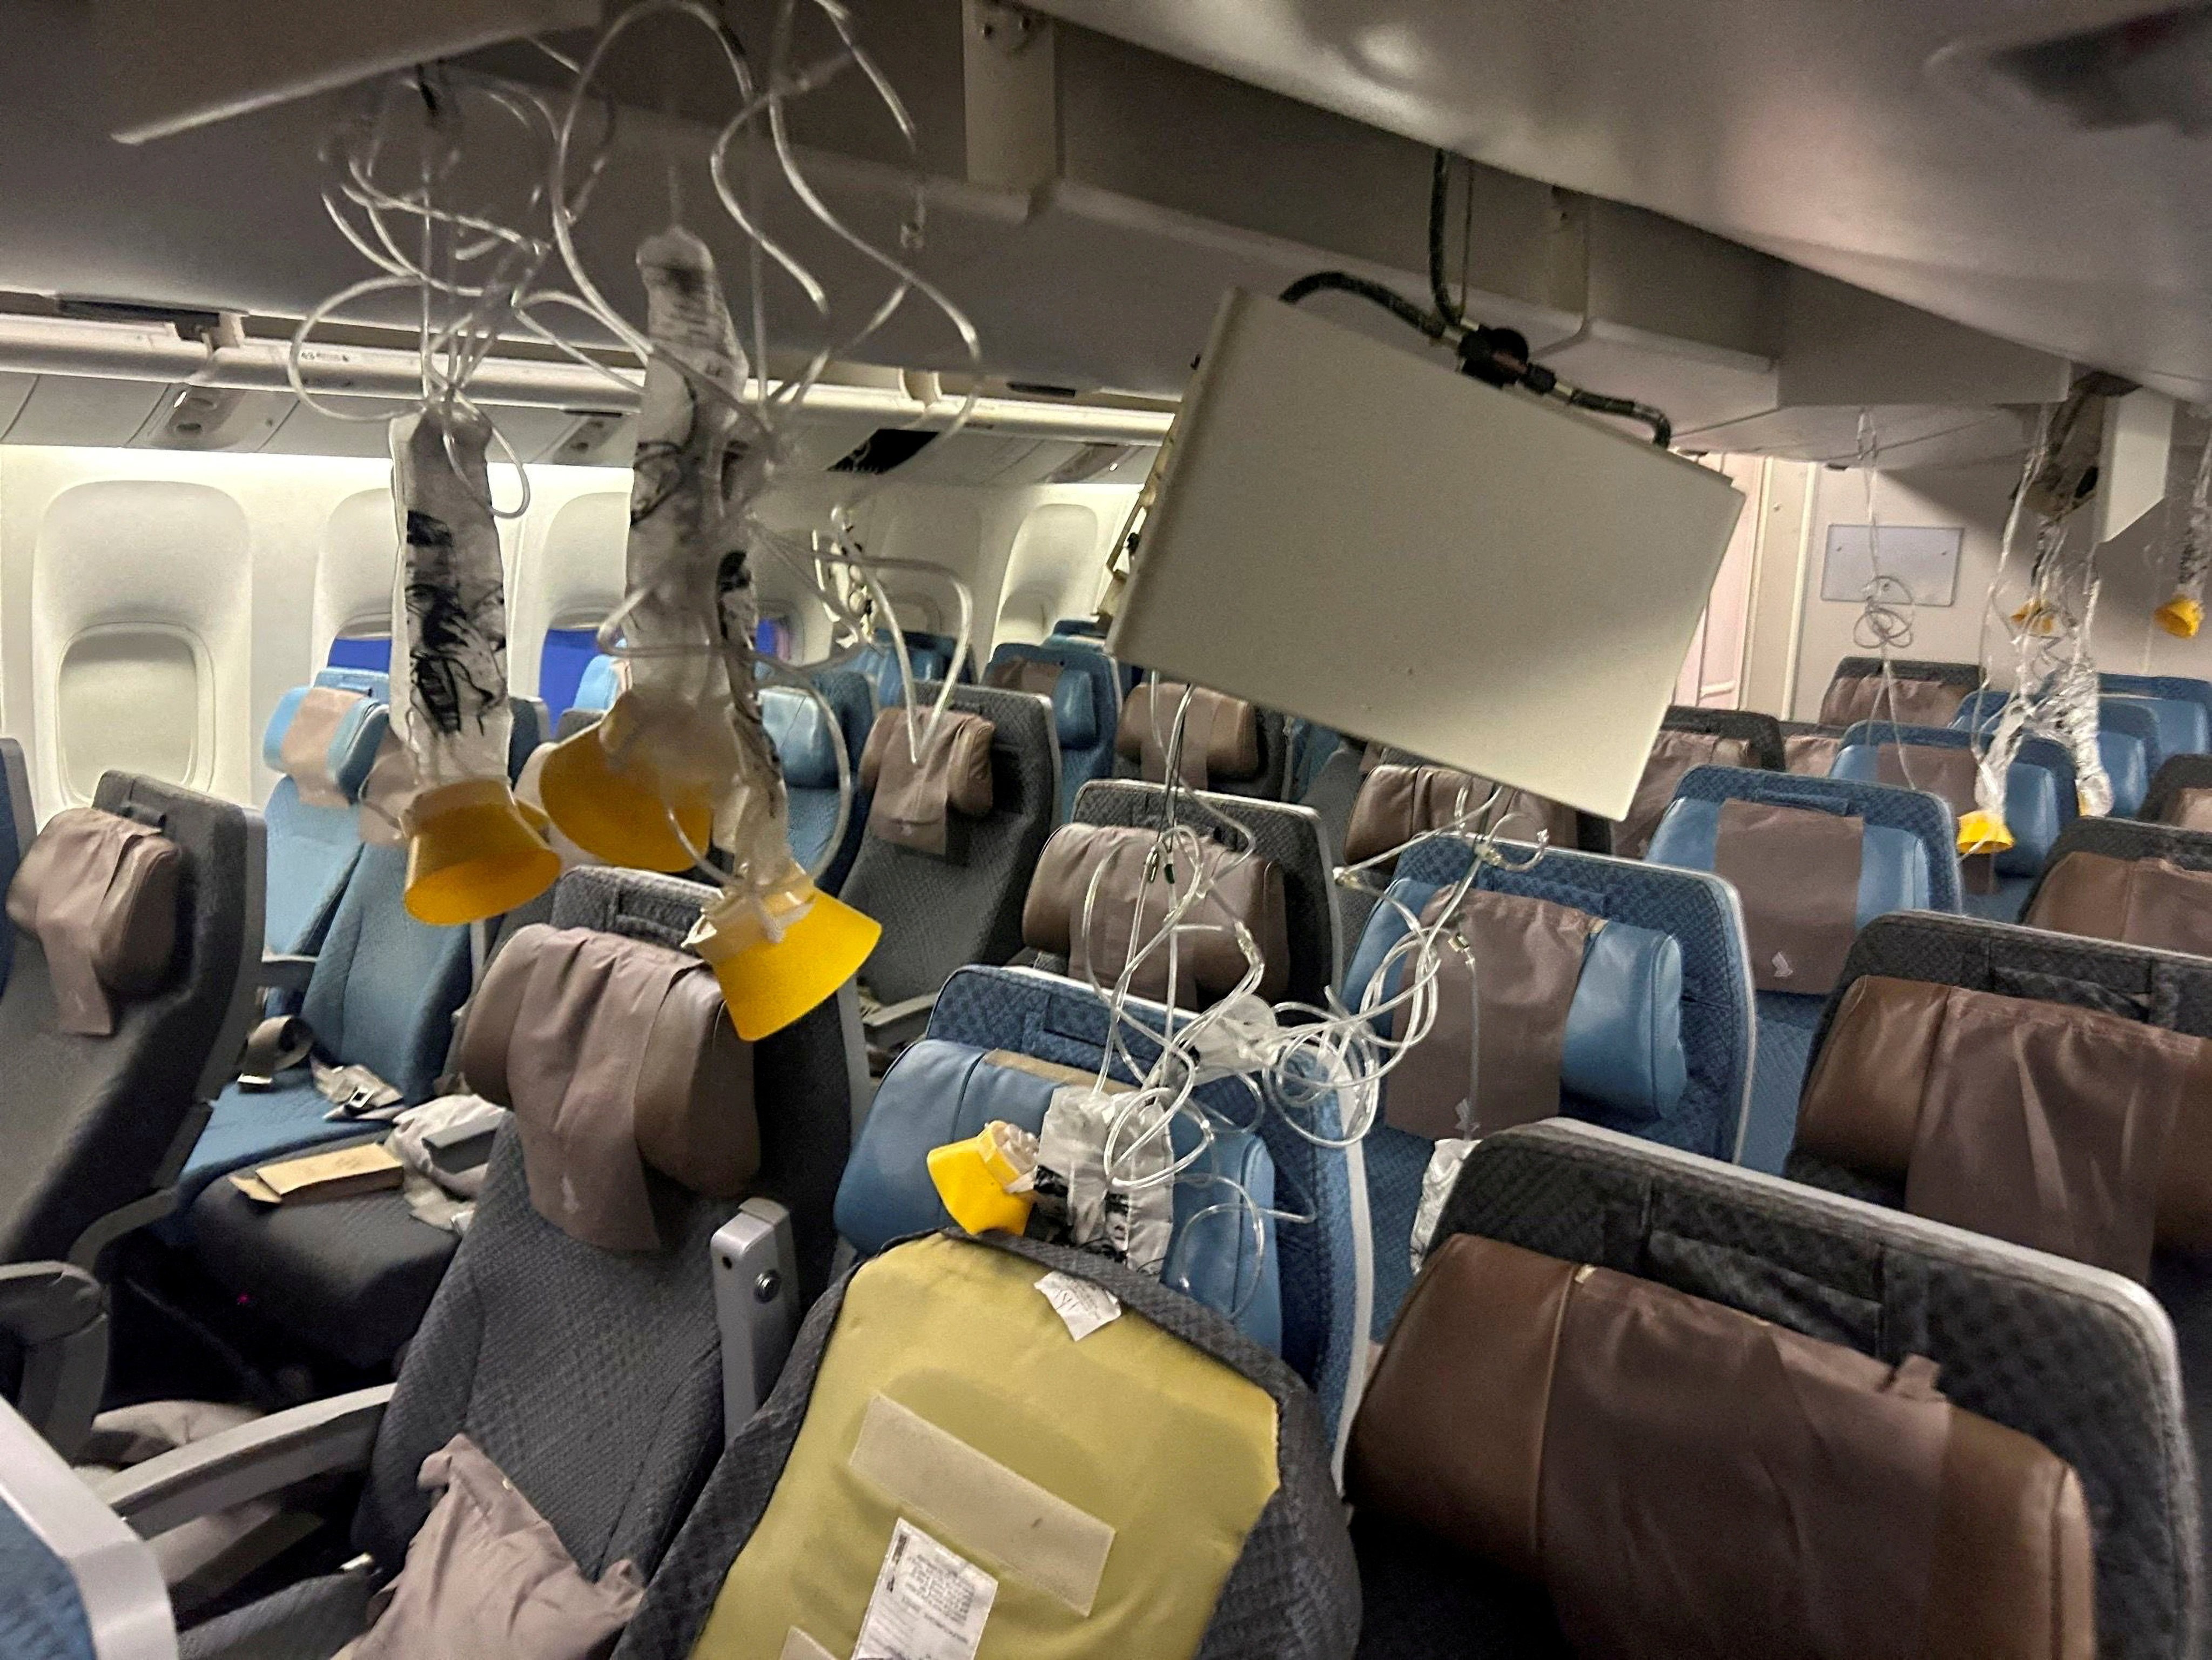 The interior of the turbulence-hit Singapore Airlines jet that made an emergency landing at Bangkok’s Suvarnabhumi International Airport on May 21. Photo: Reuters